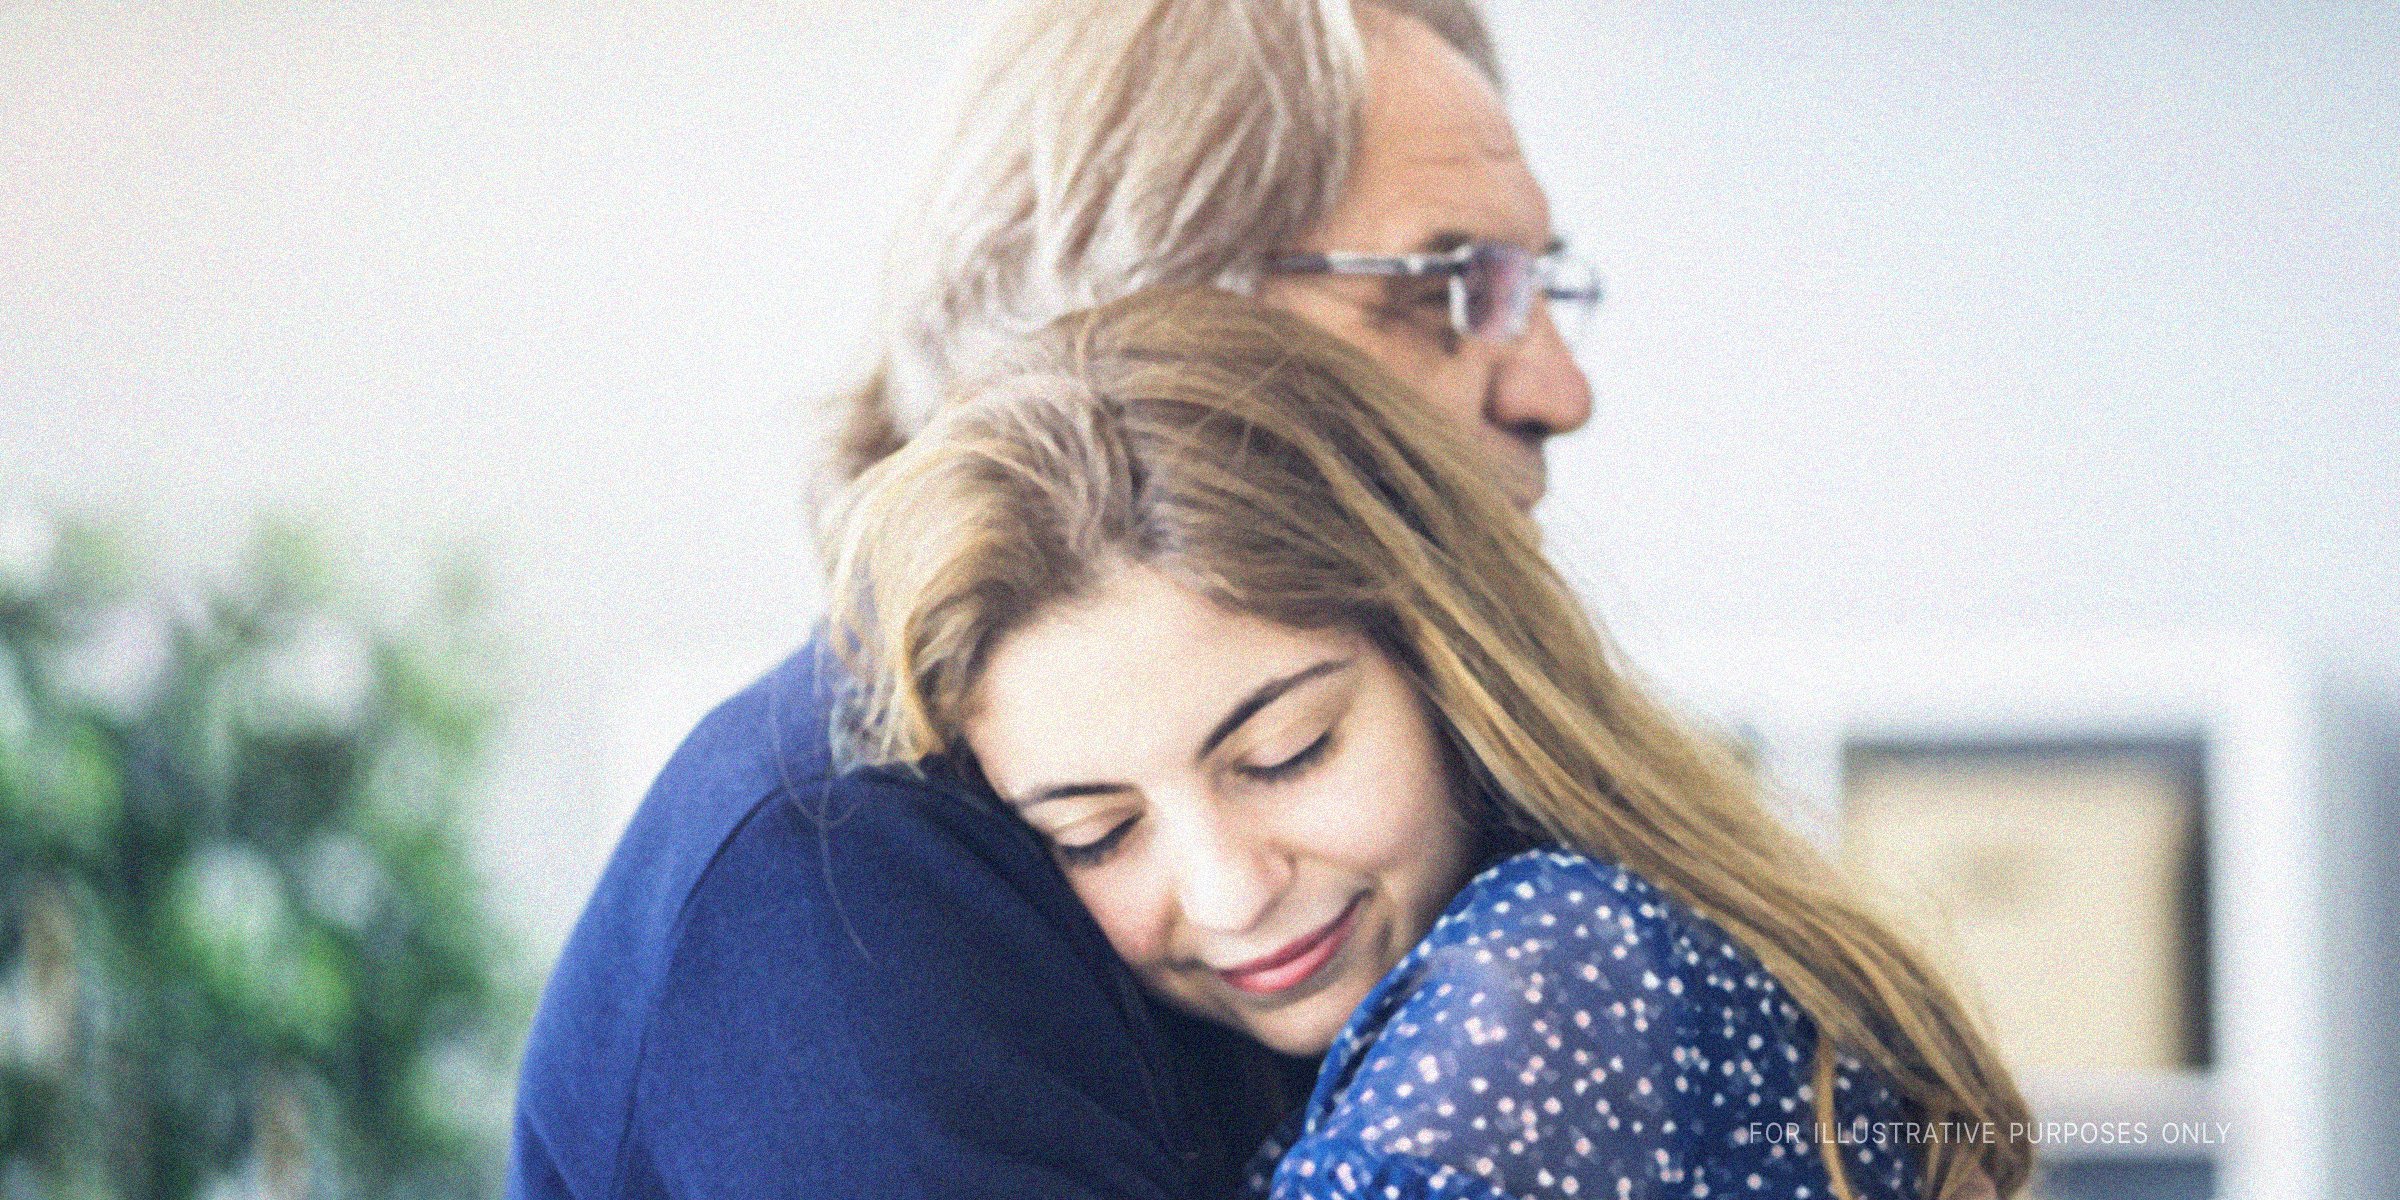 A father and daughter's embrace | Source: Shutterstock